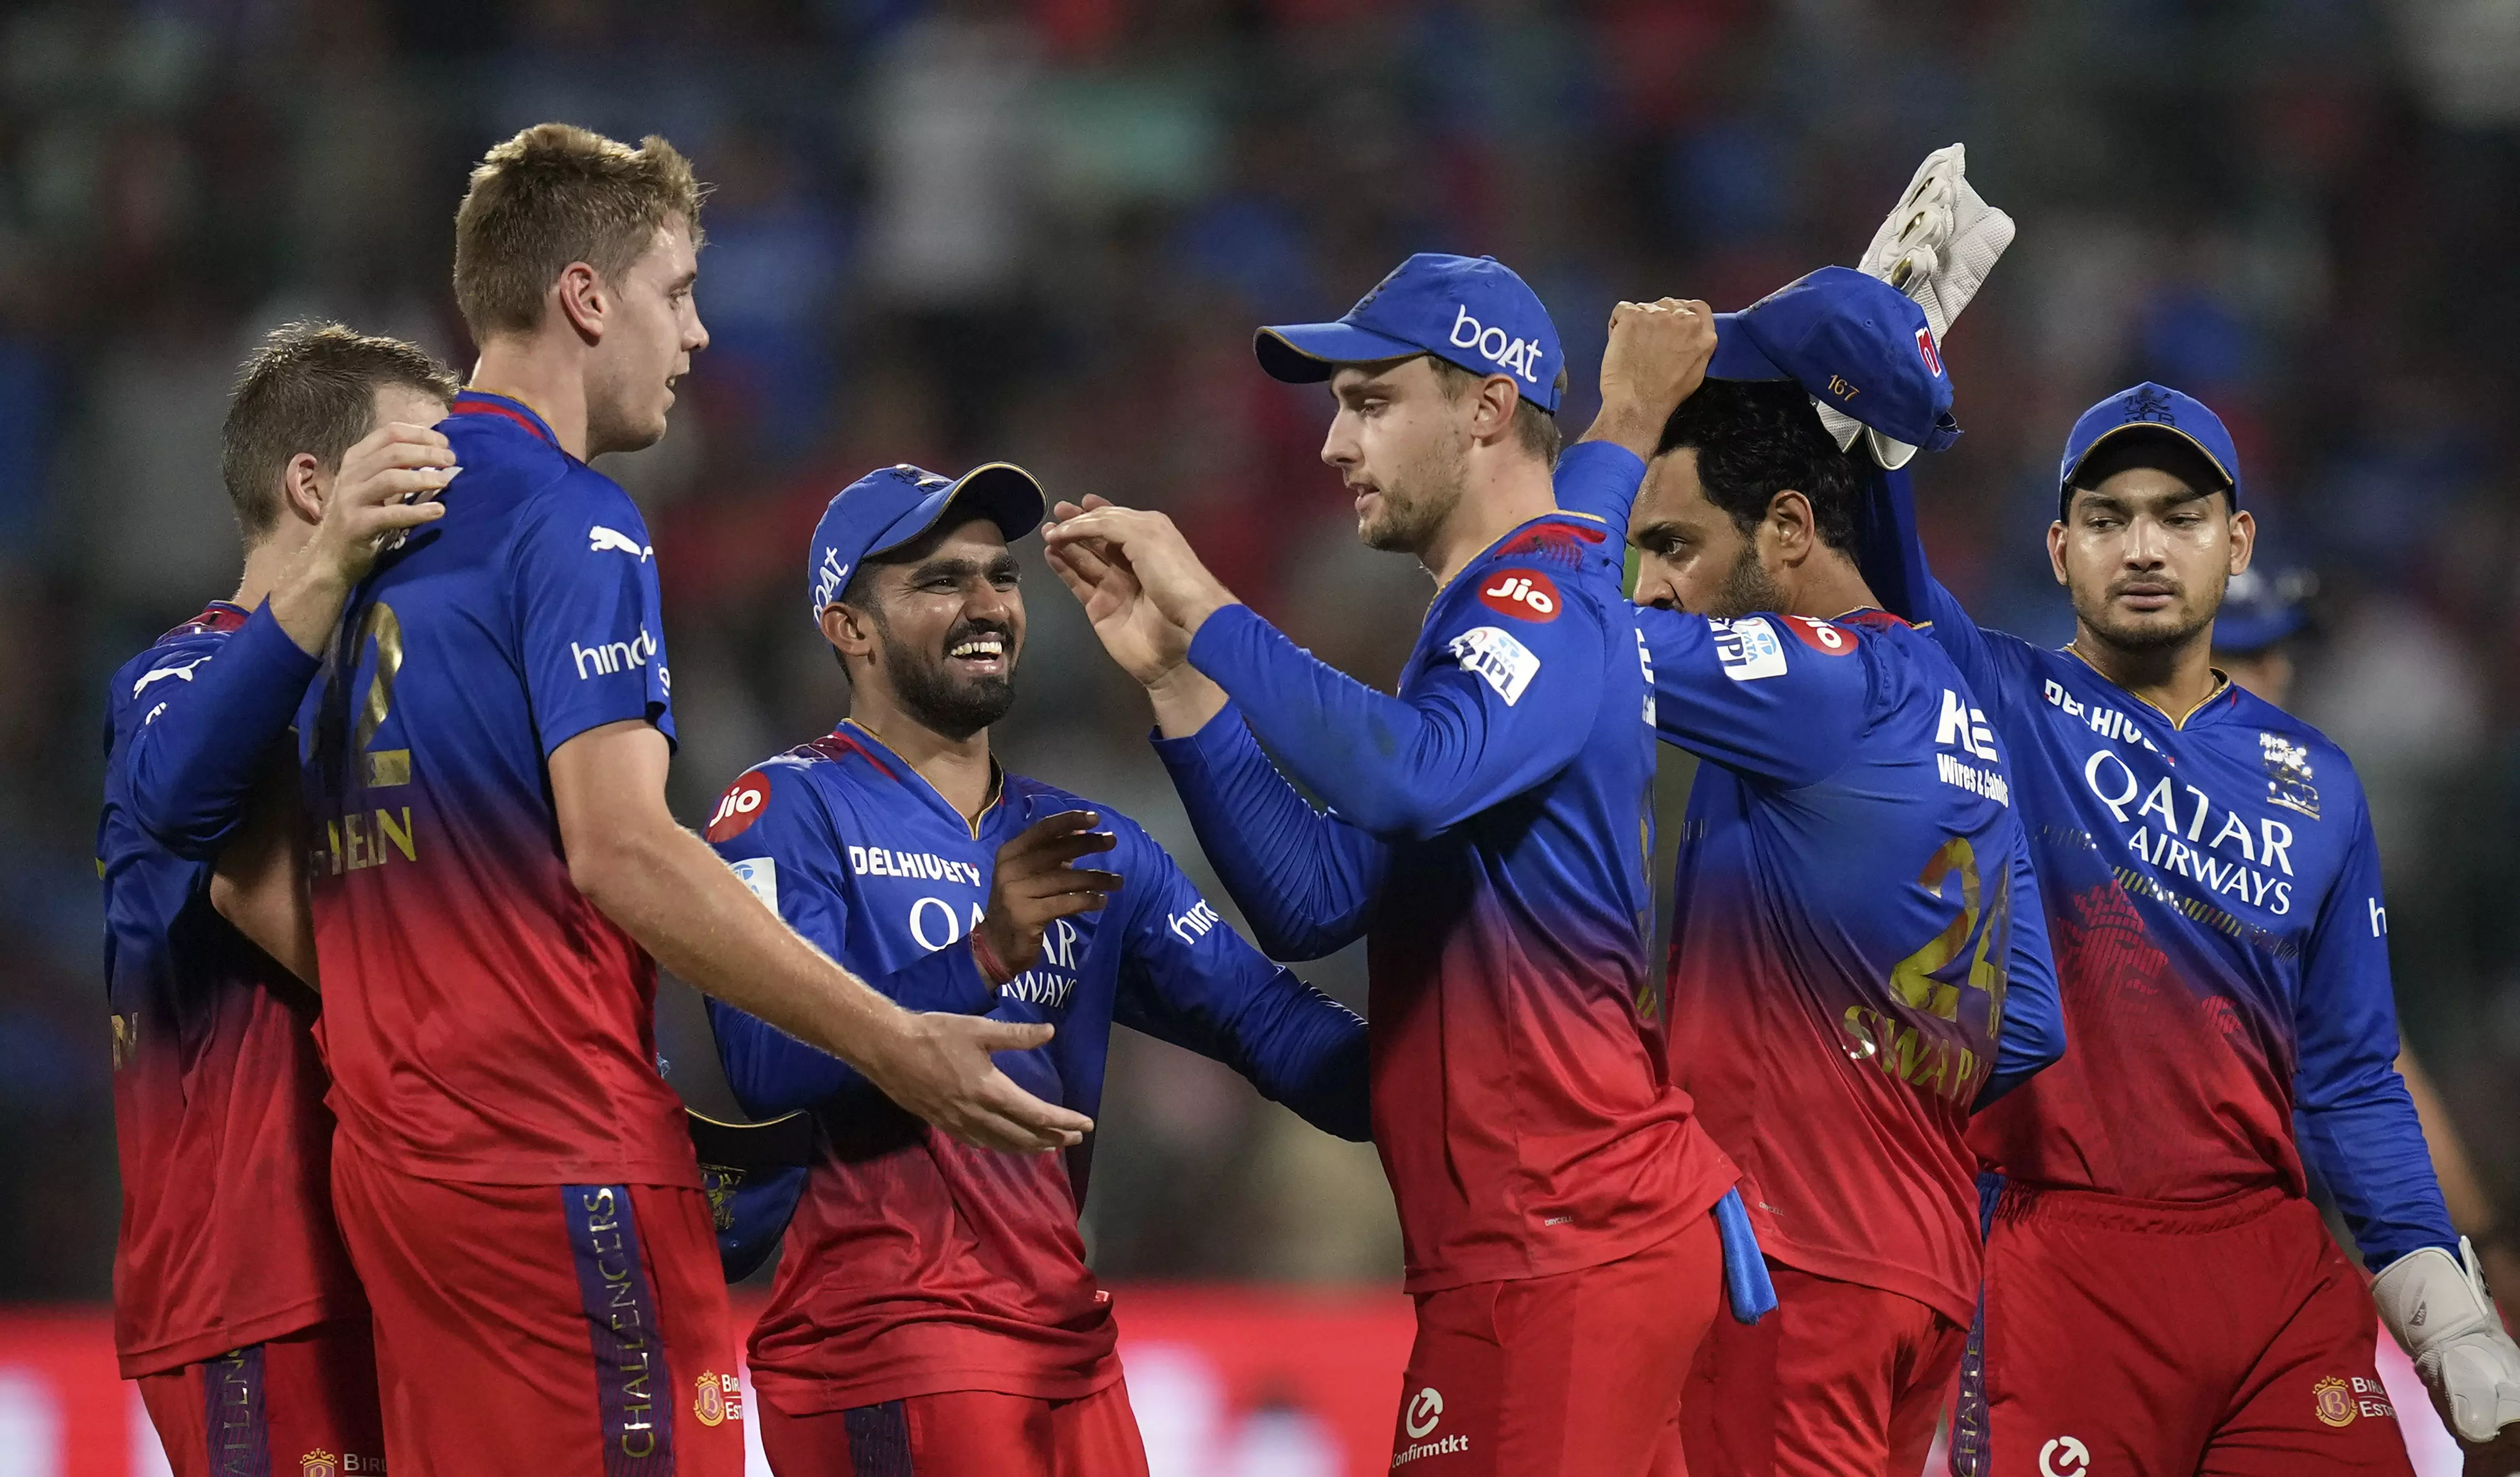 Royal Challengers Bangalore Beats Delhi Capitals to Move Up The Points Table